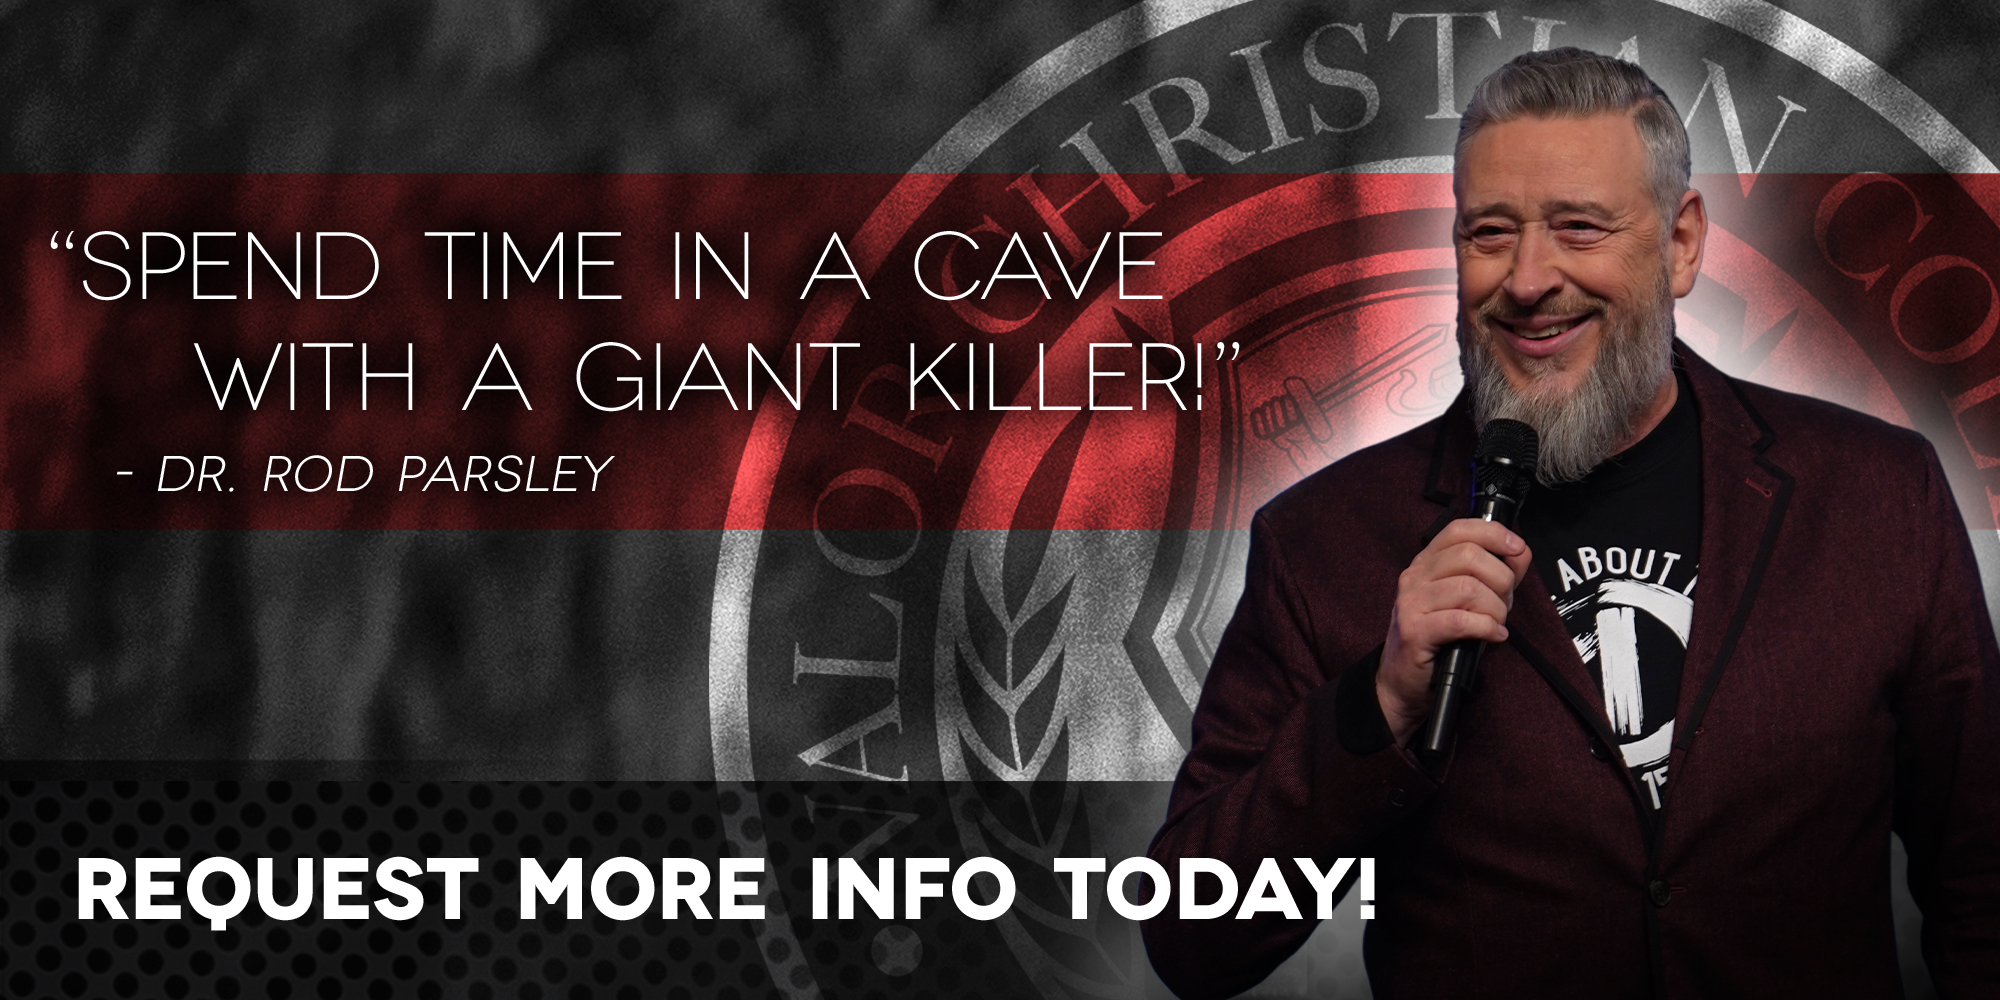 Spend time in a cave with a Giant Killer! - Dr. Rod Parsley